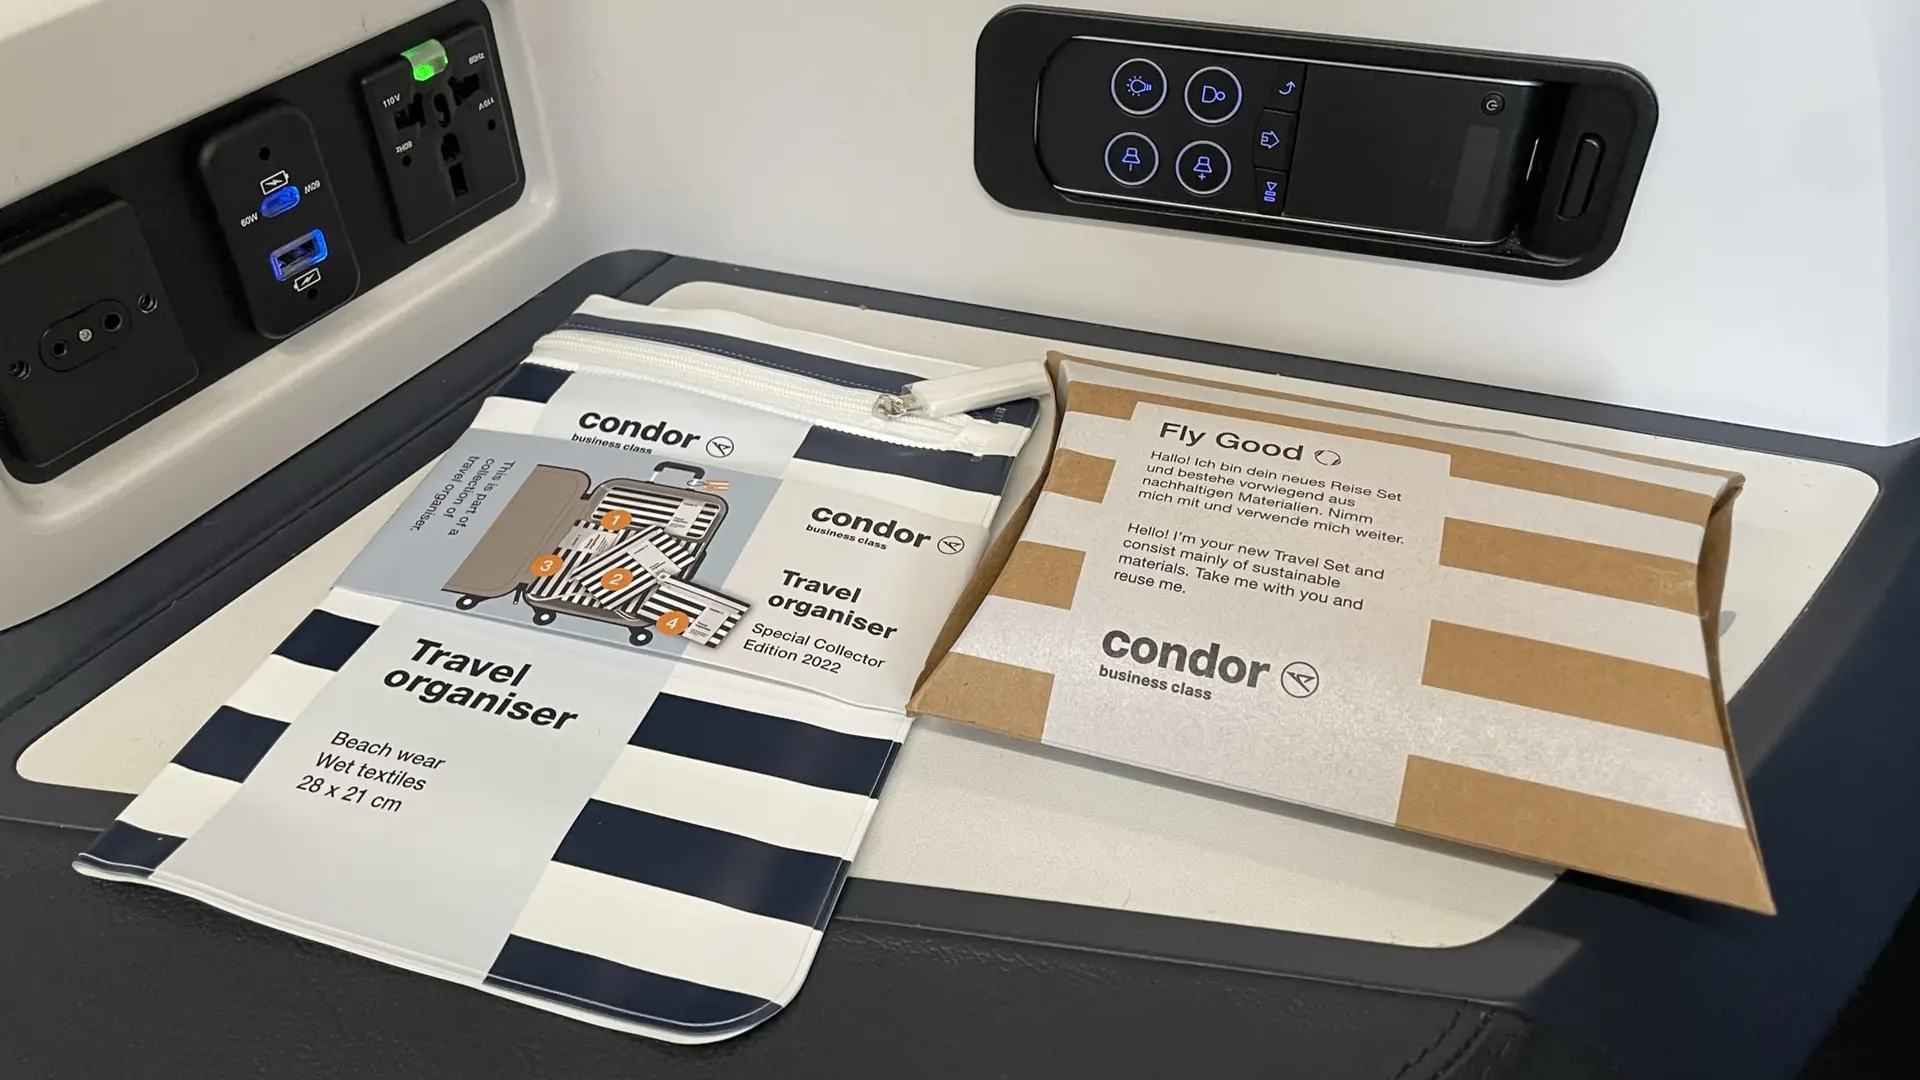 Airline review Amenities & Facilities - Condor - 1